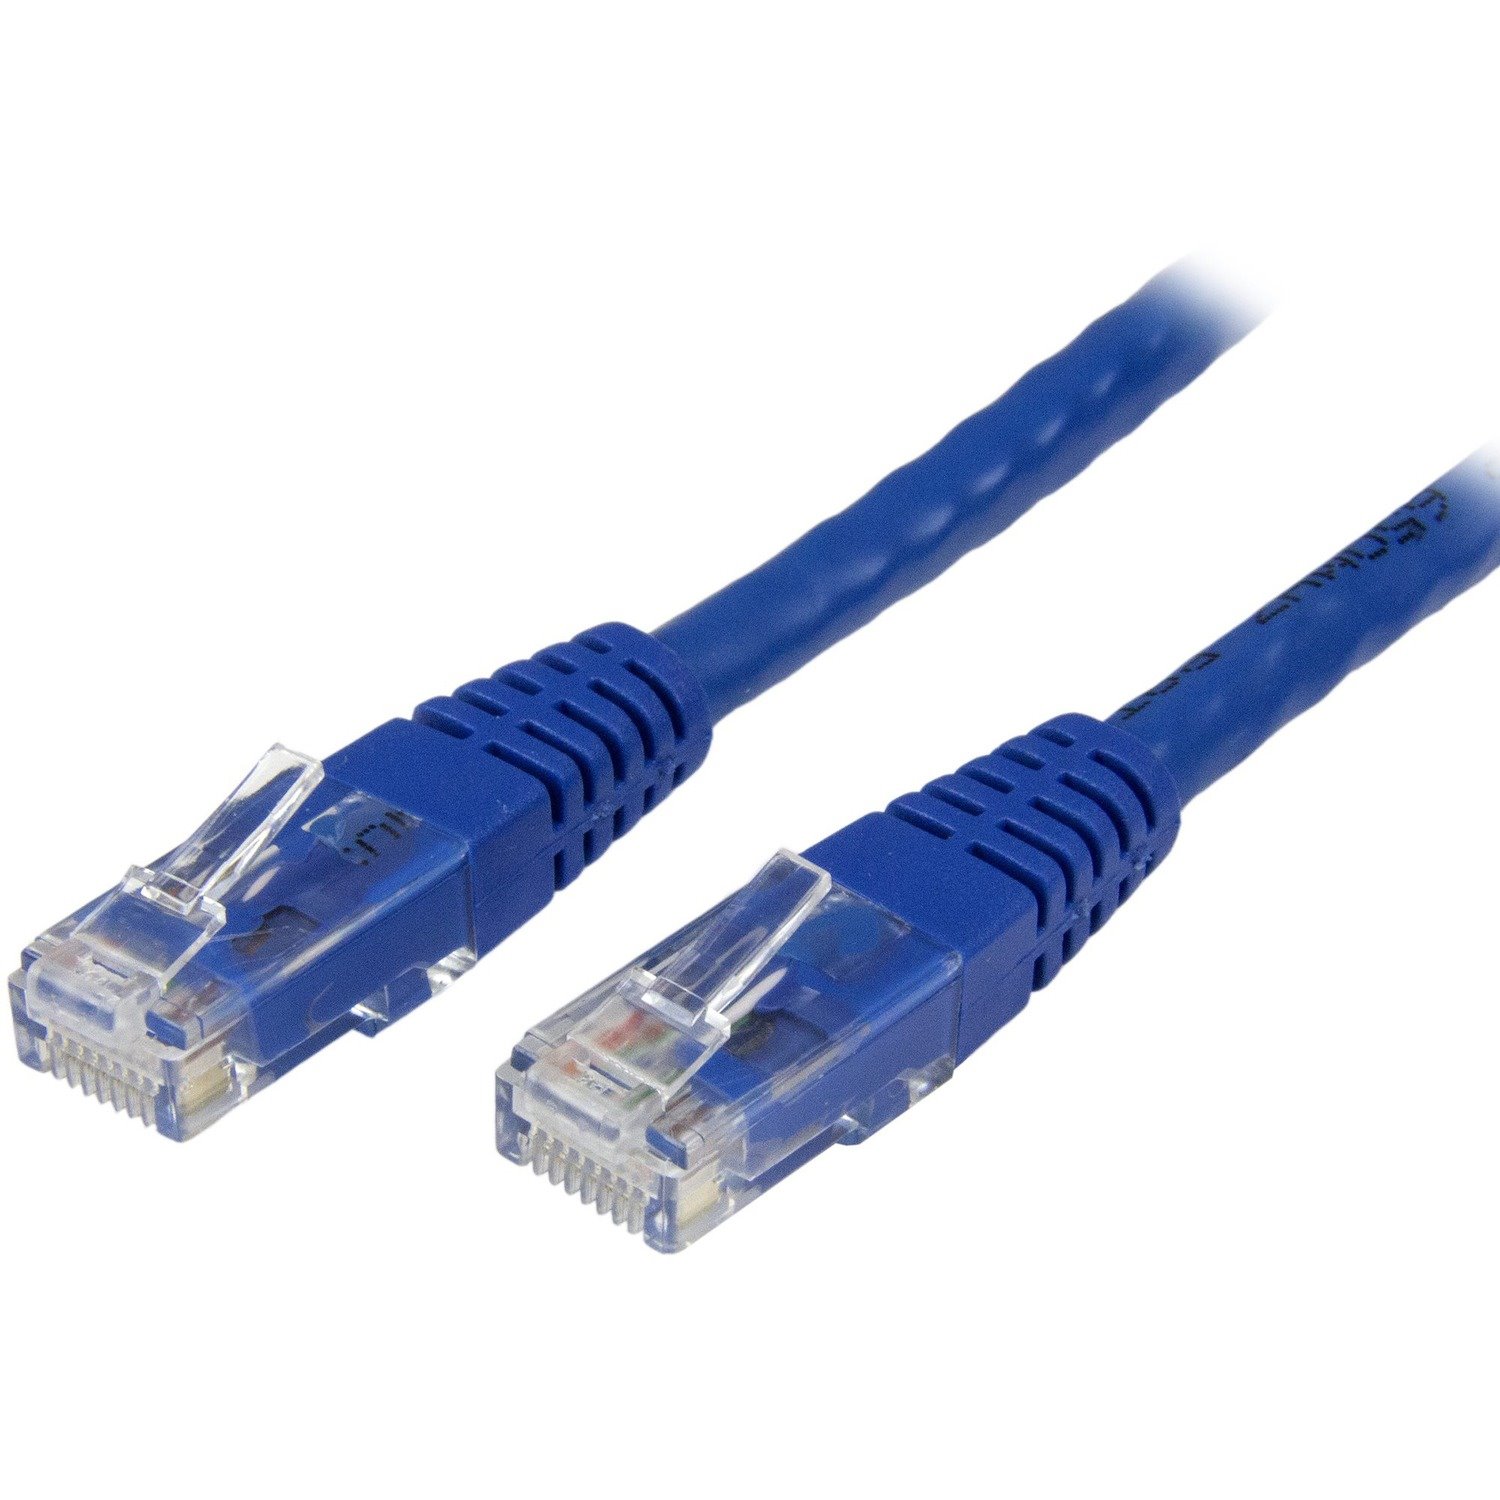 StarTech.com 30.48 cm Category 6 Network Cable for Network Device, Wall Outlet, Workstation, Security Device, VoIP Device, Hub, Distribution Panel